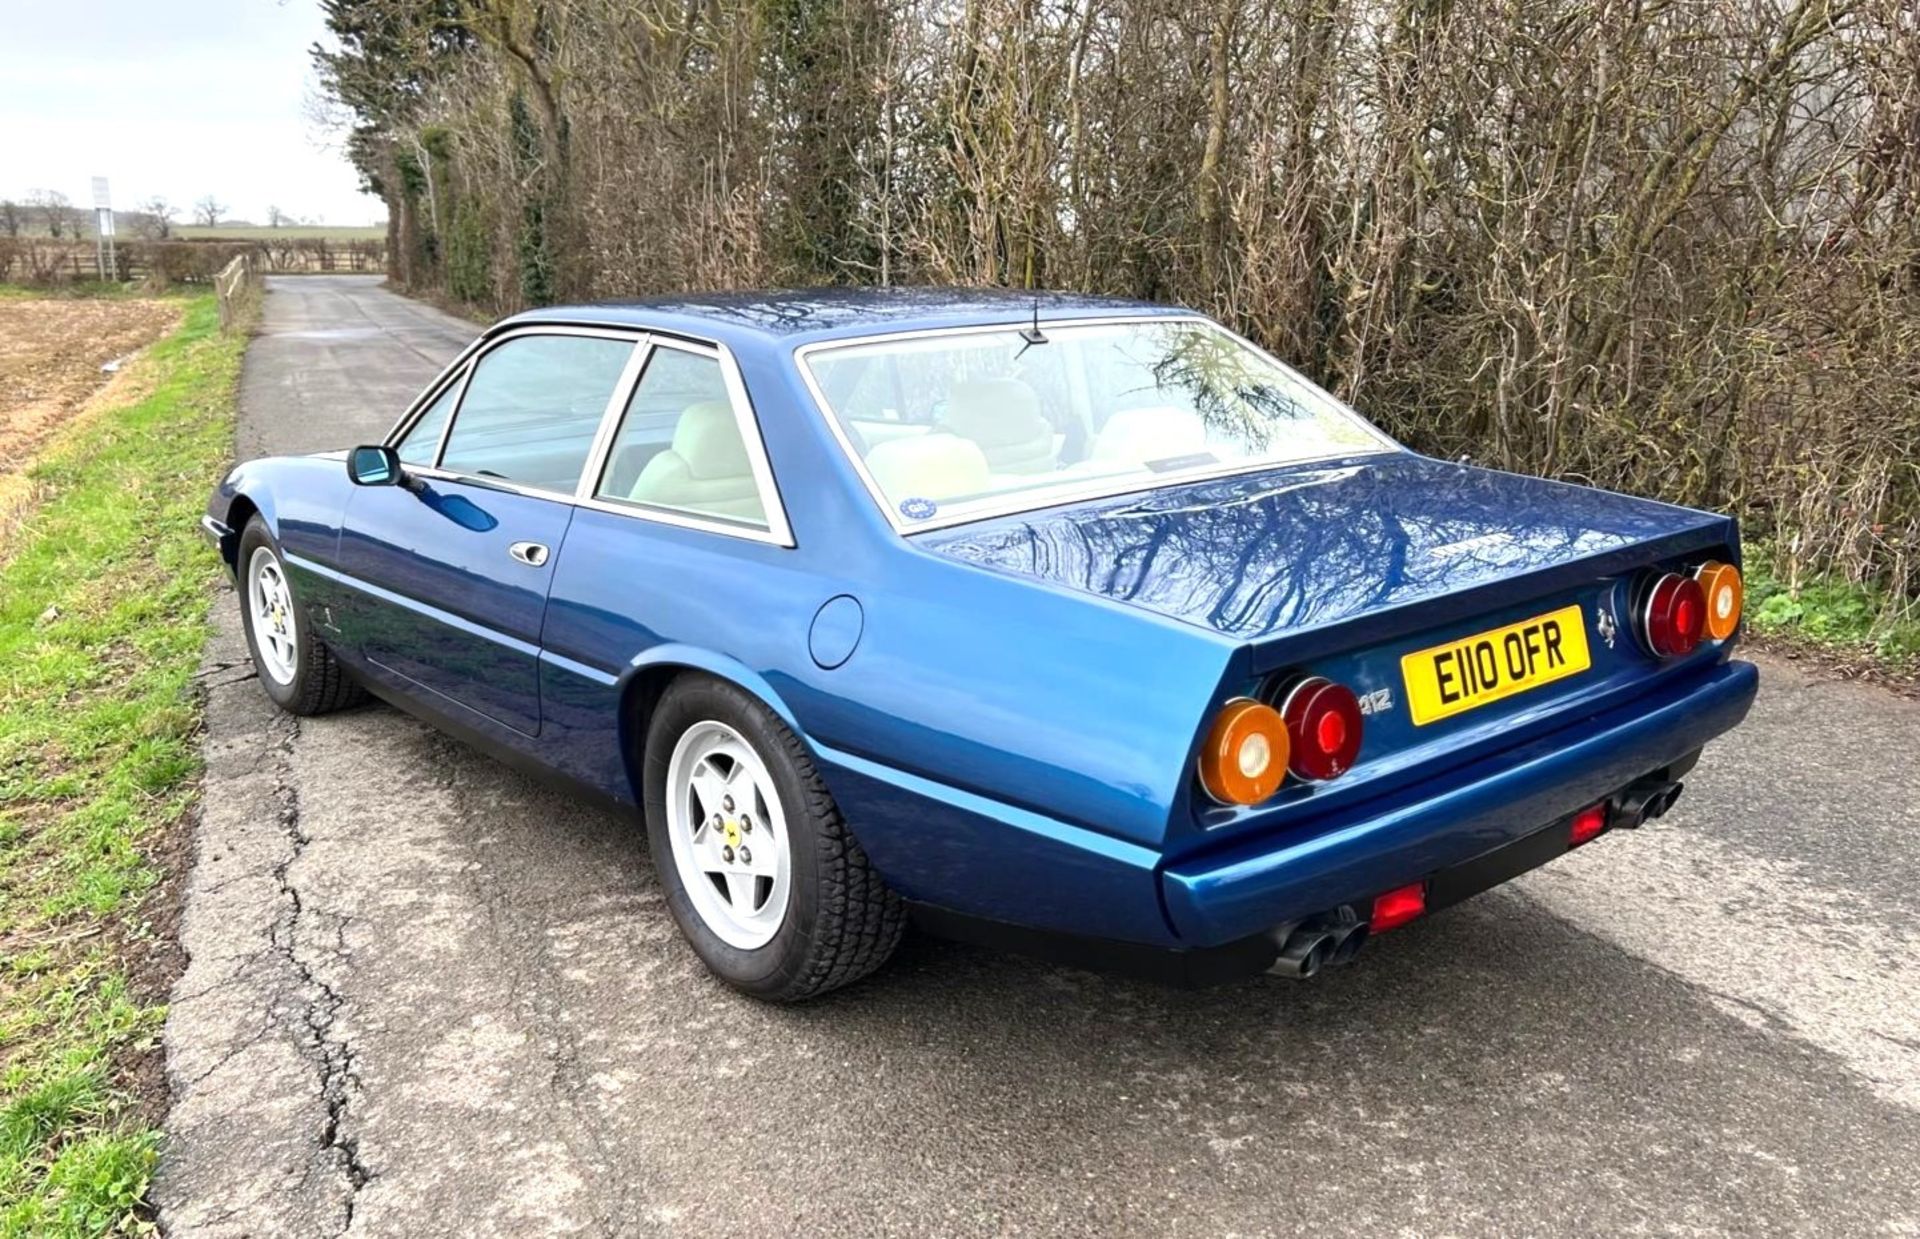 1988 FERRARI 412i Registration Number: E110 OFR Chassis Number: Recorded Mileage: 105,831 miles - Image 3 of 11